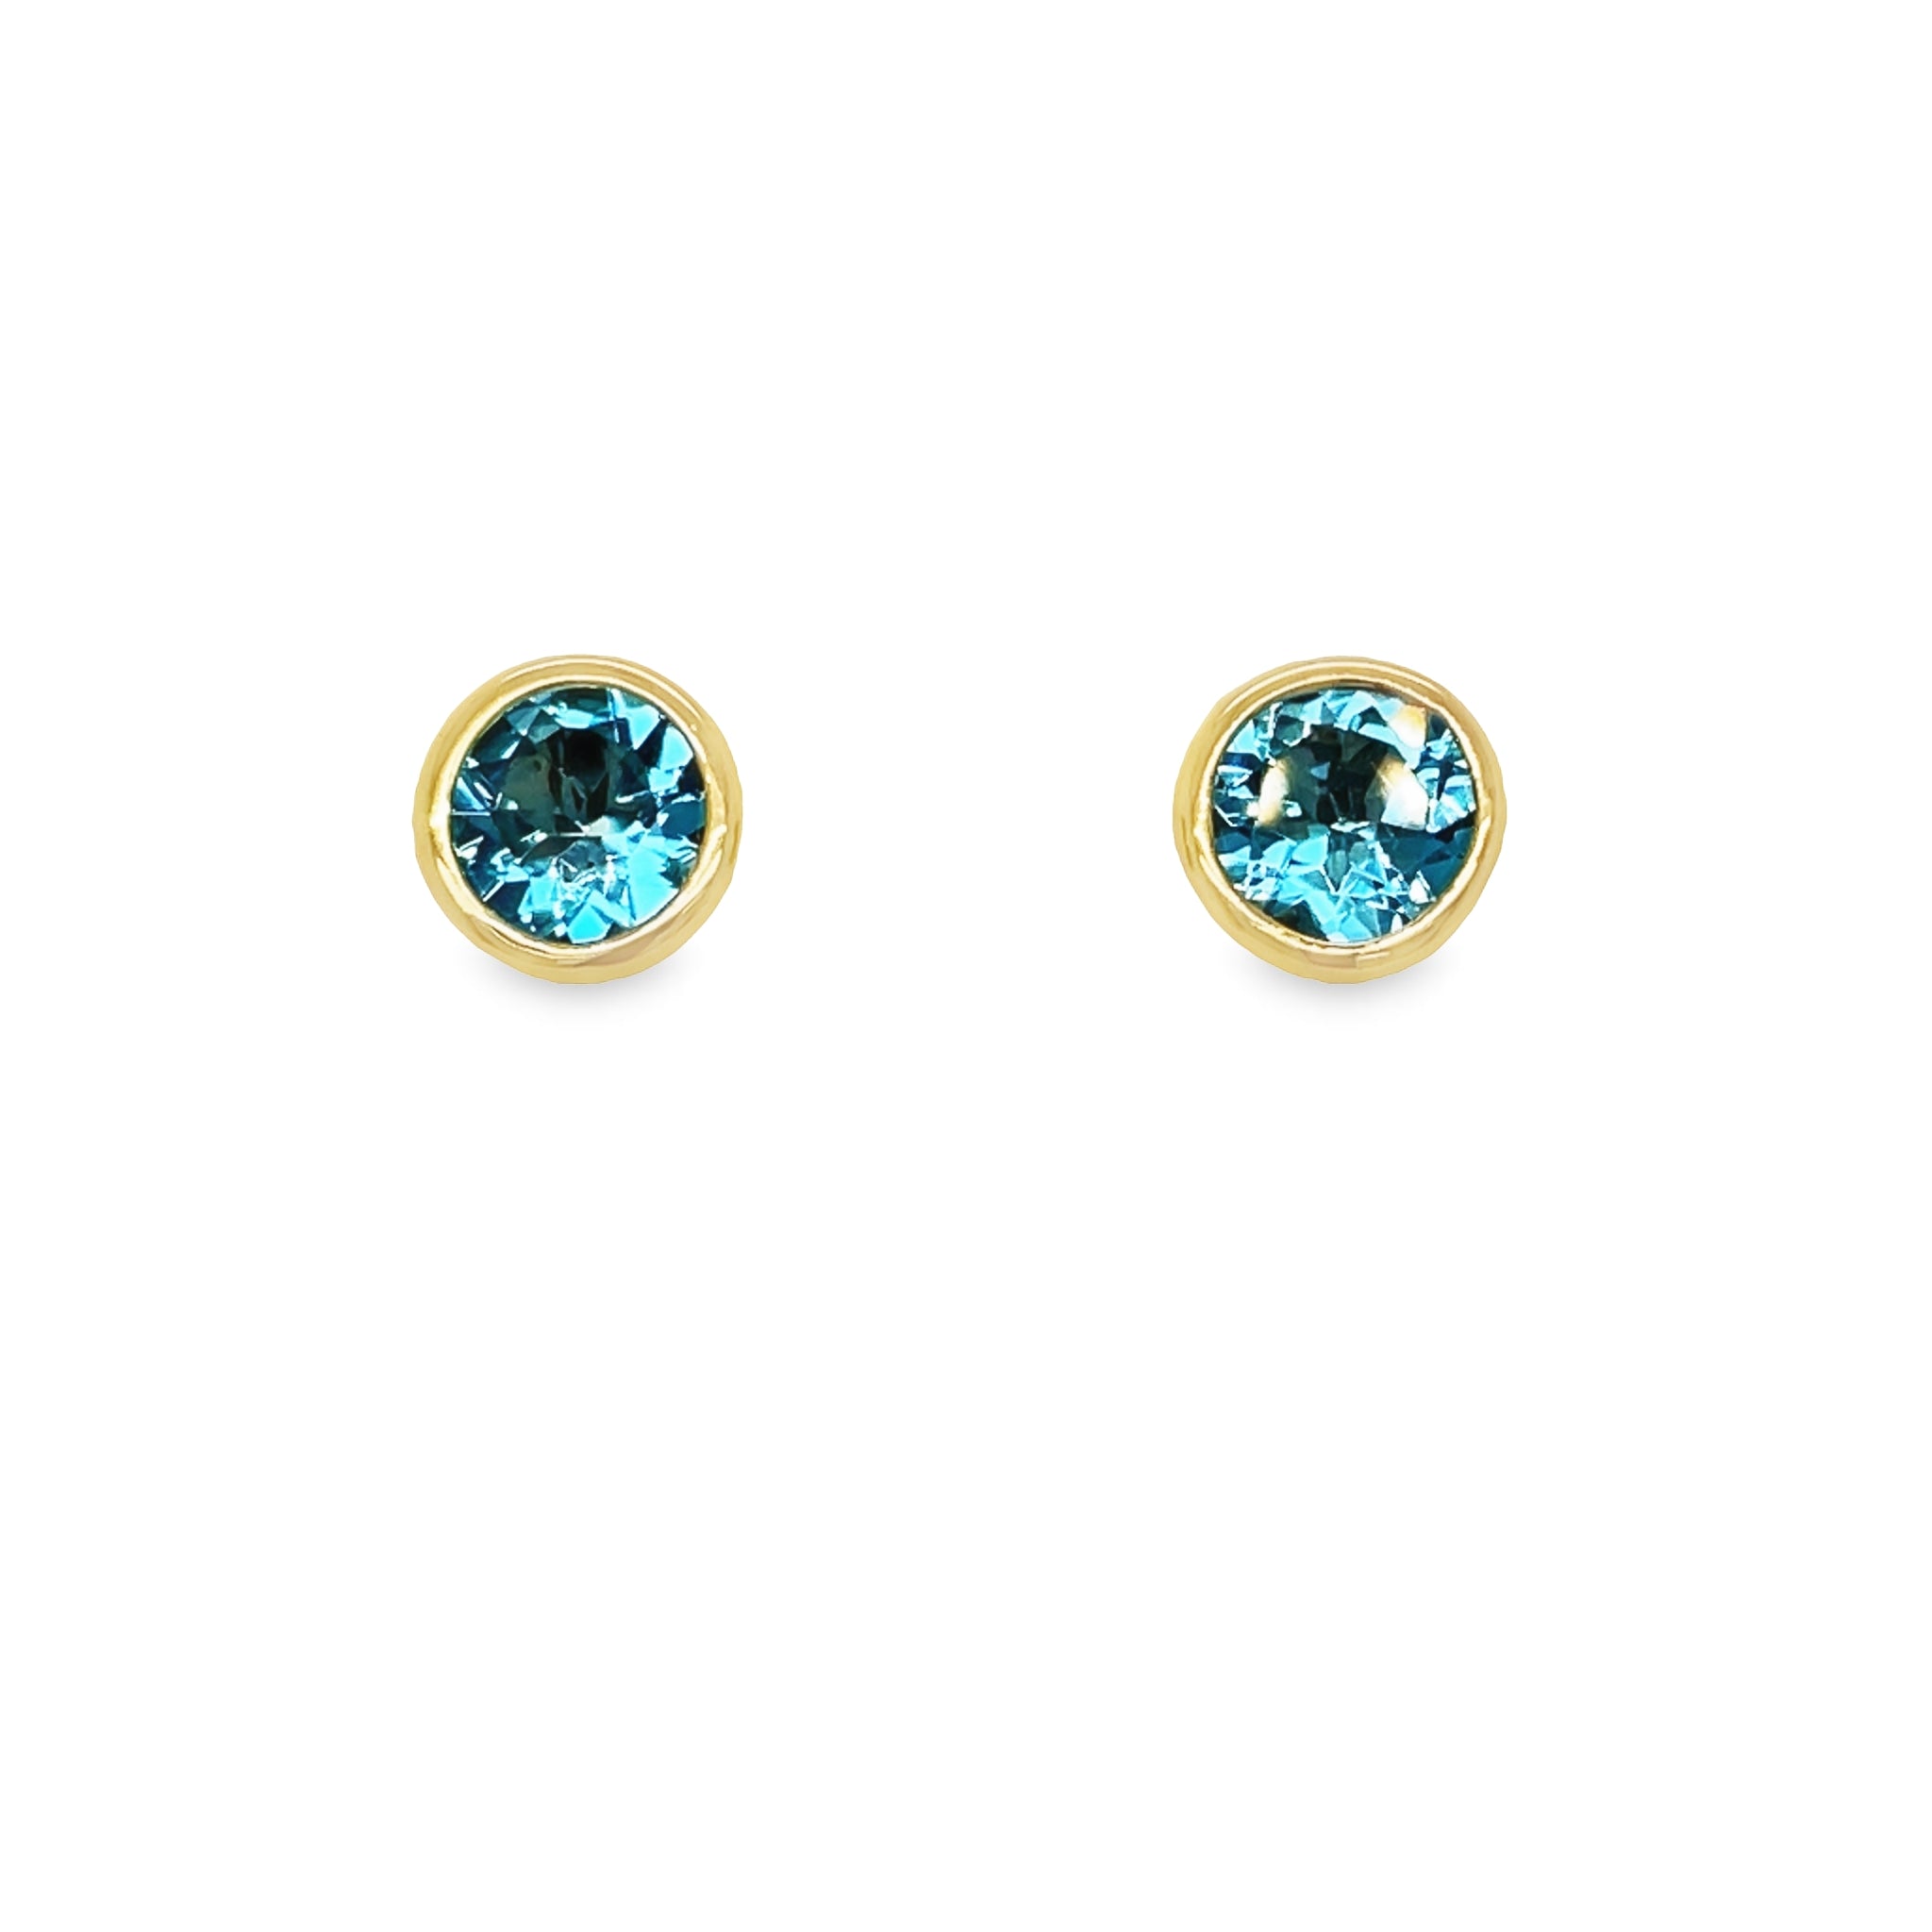 Beautifully crafted in 18k yellow gold, these citrine stud earrings will add a luxurious sparkle to any outfit. The large round blue topaz are secured with friction backs, ensuring a secure fit that will make you feel confident. Make a bold and sophisticated statement with these stunning earrings!